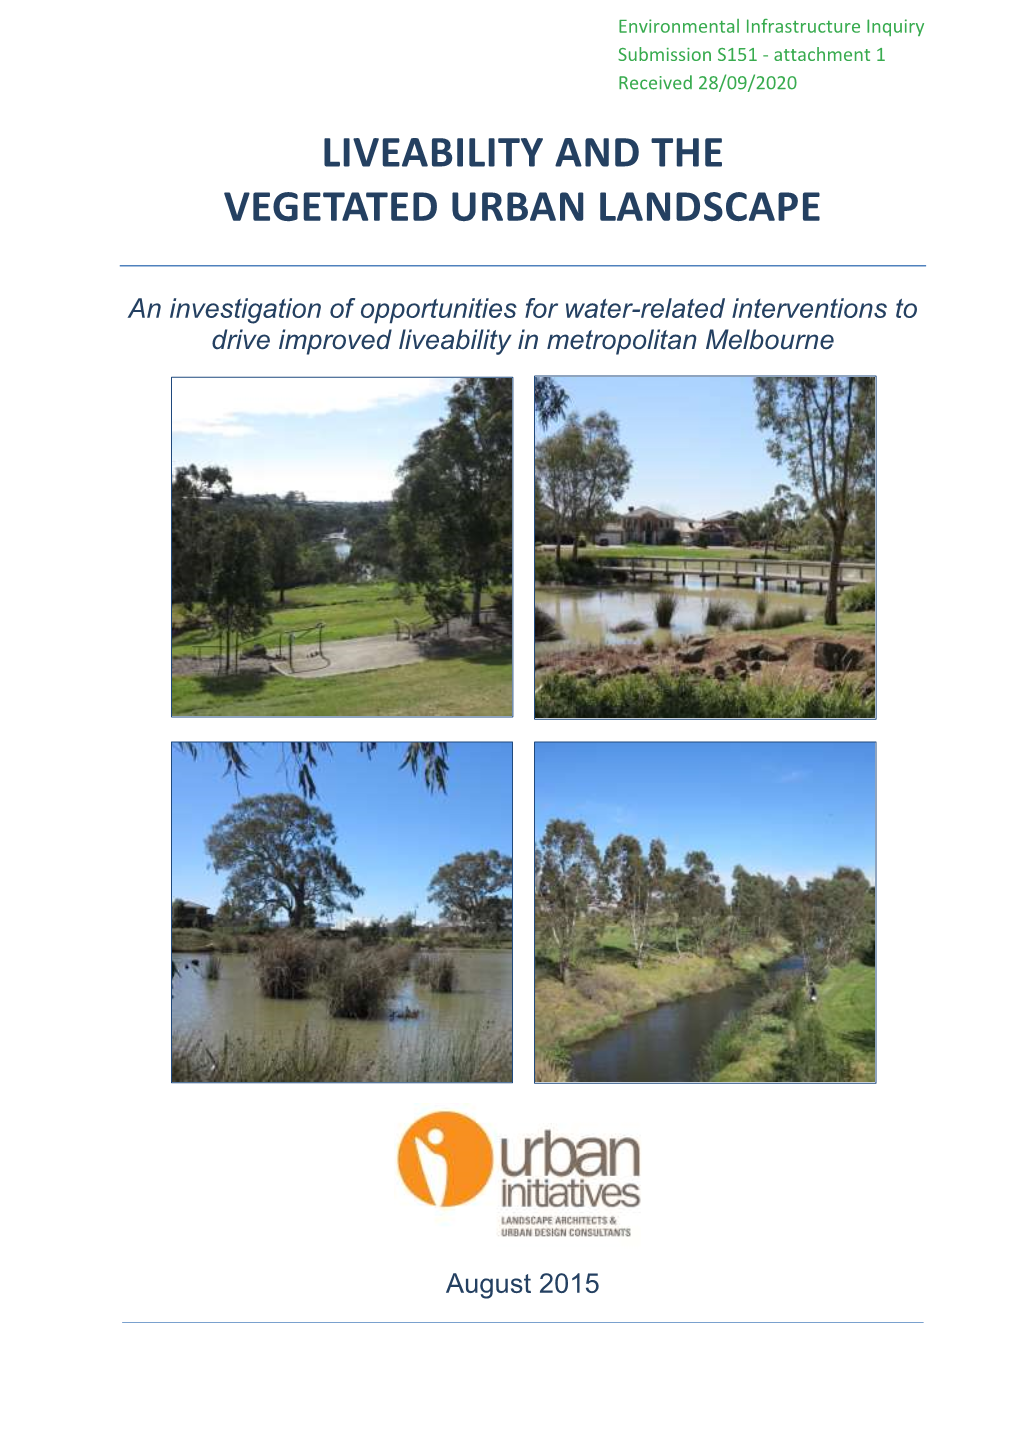 Liveability and the Vegetated Urban Landscape